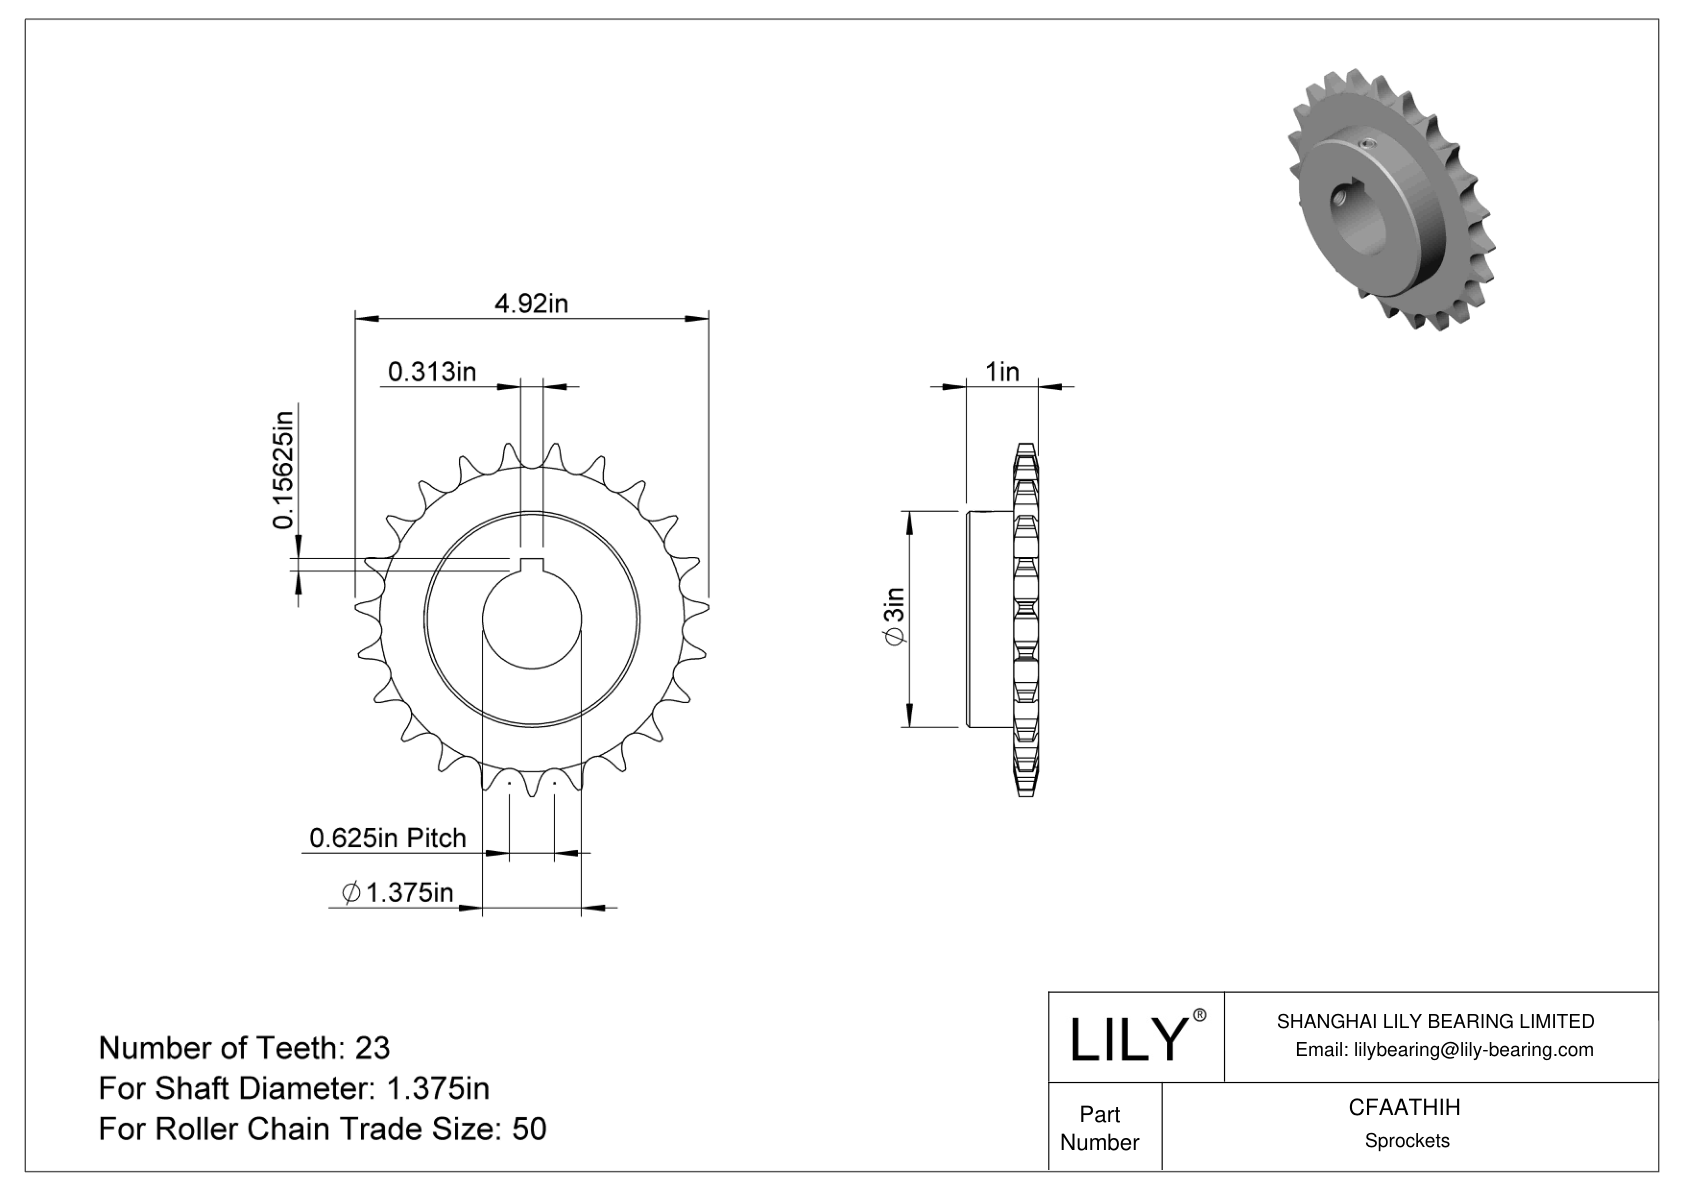 CFAATHIH Wear-Resistant Sprockets for ANSI Roller Chain cad drawing